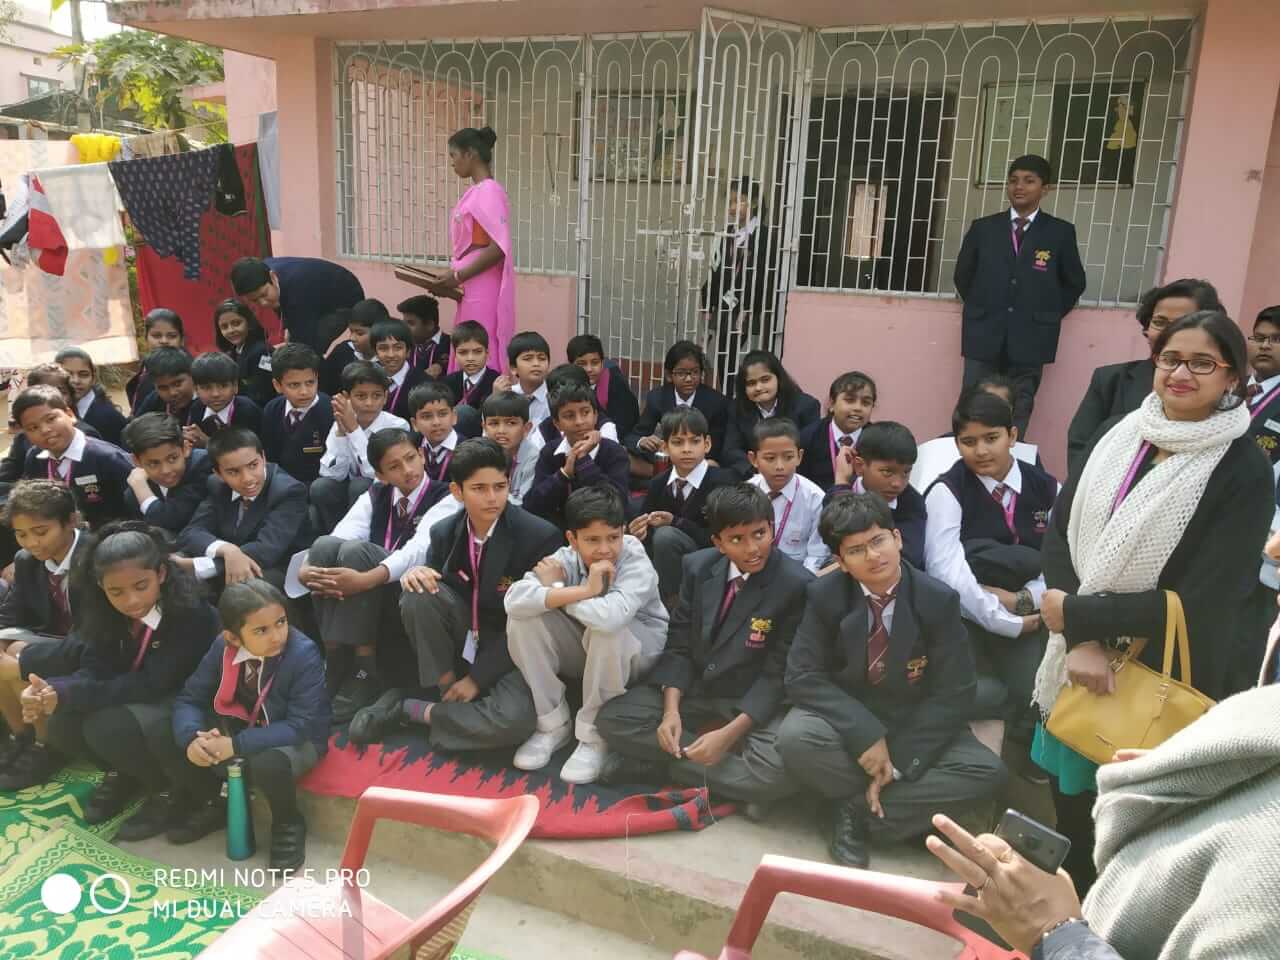 Grade III – A visit to Orphanage